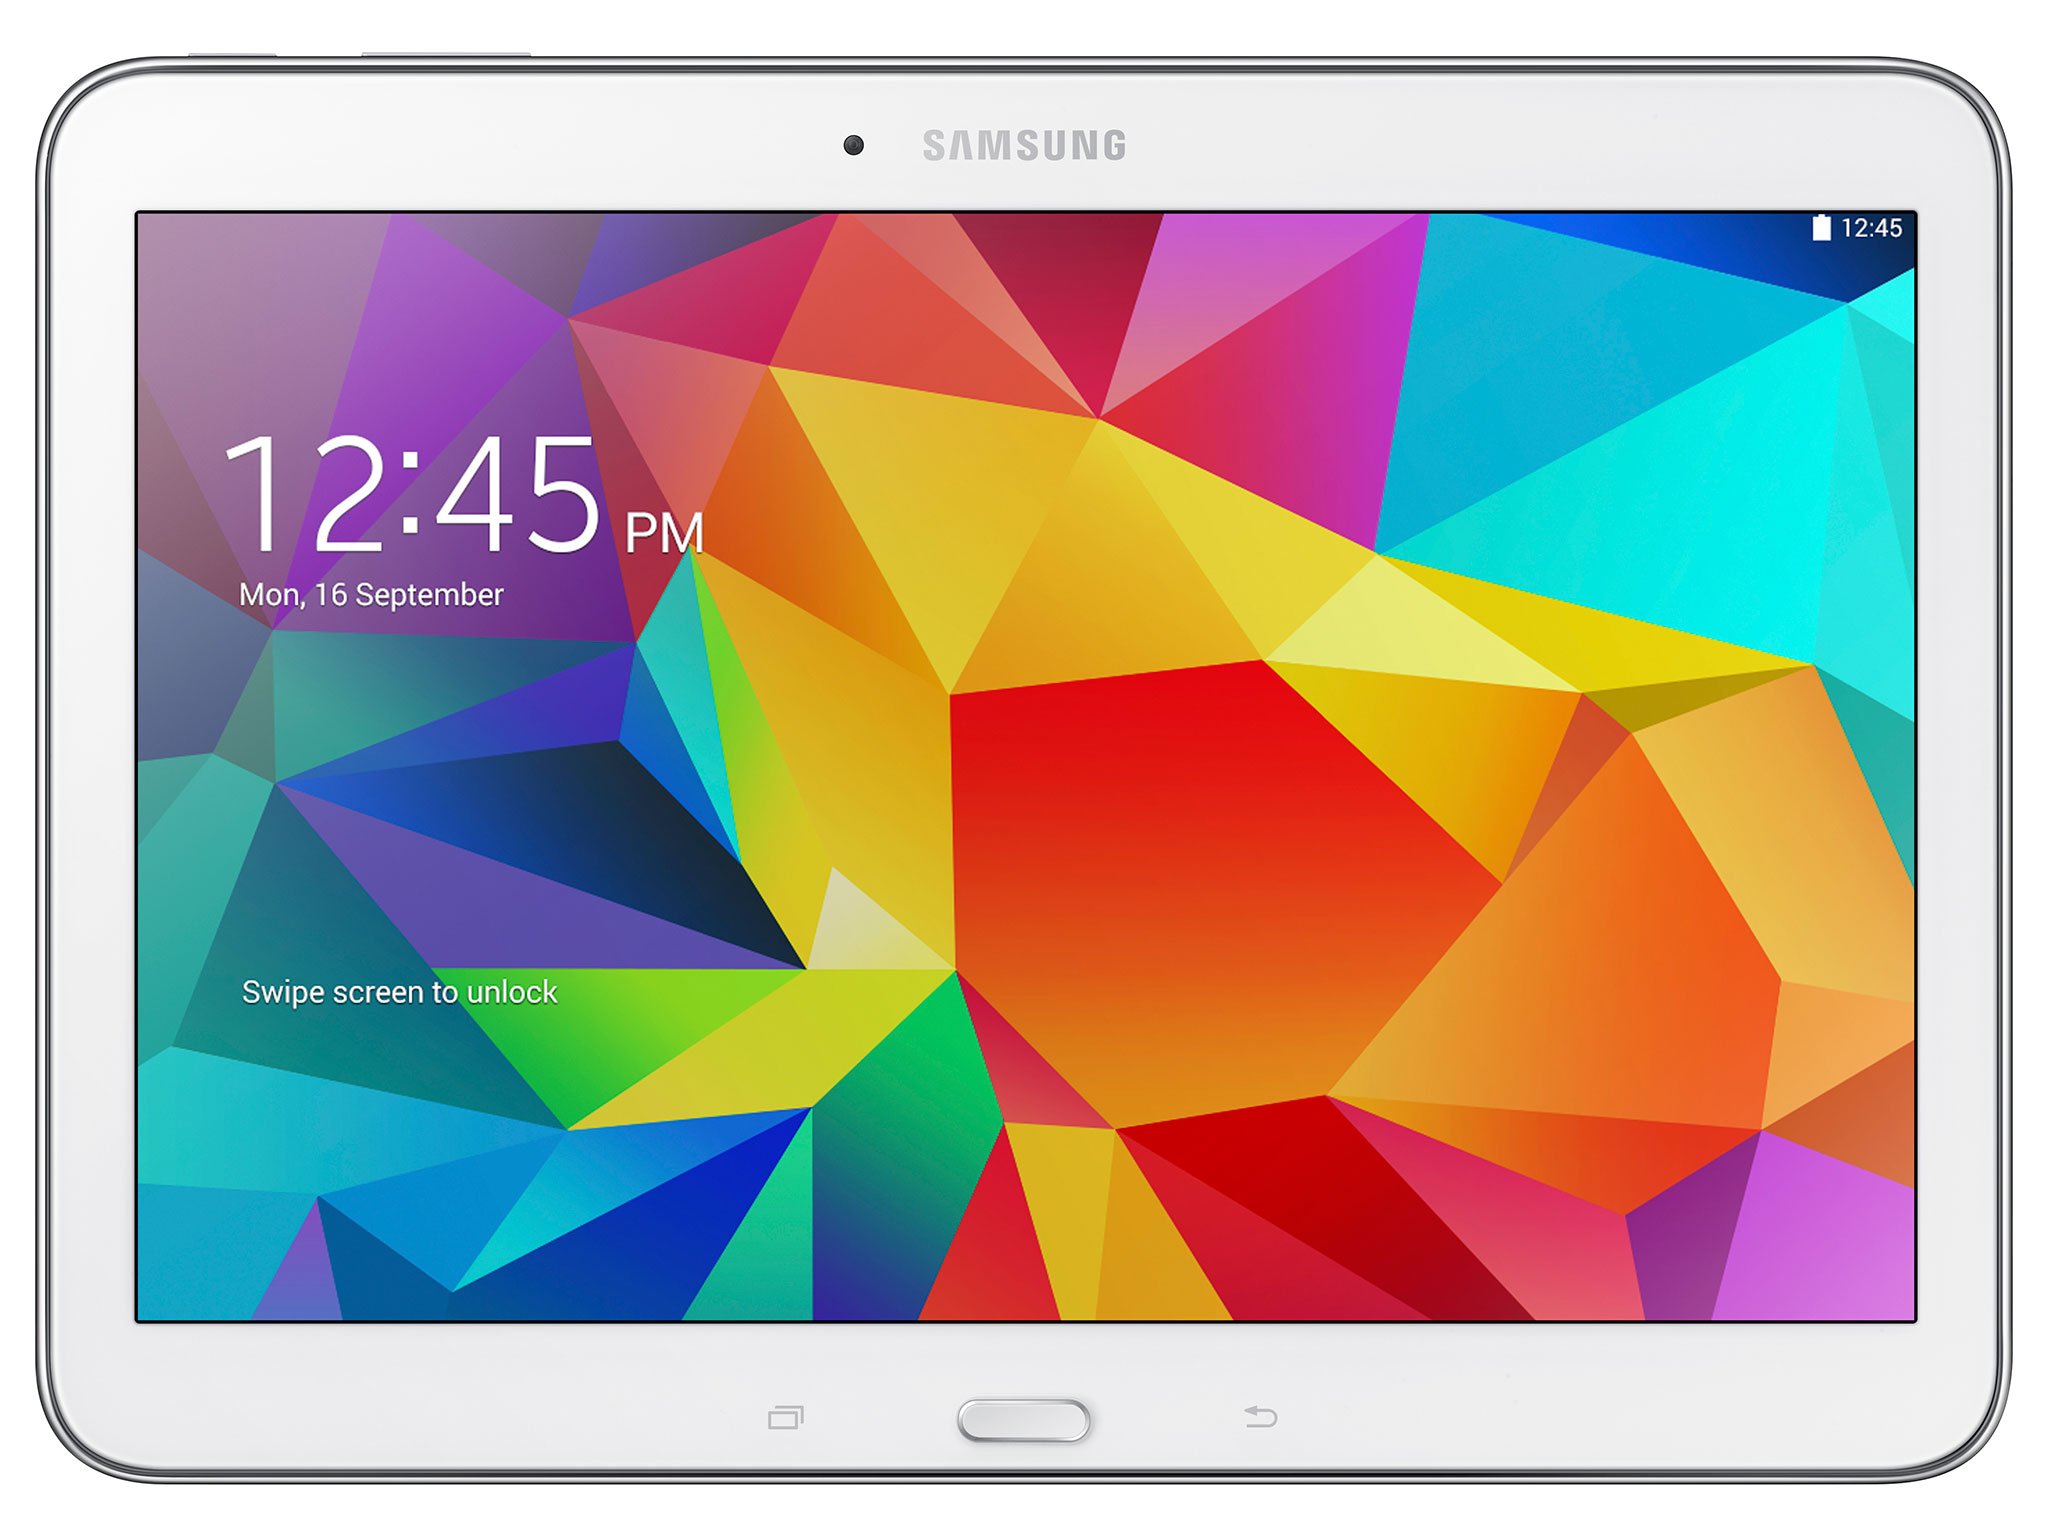 Samsung announced Galaxy Tab 4 in 7- 8-, and 10.1-inch flavors